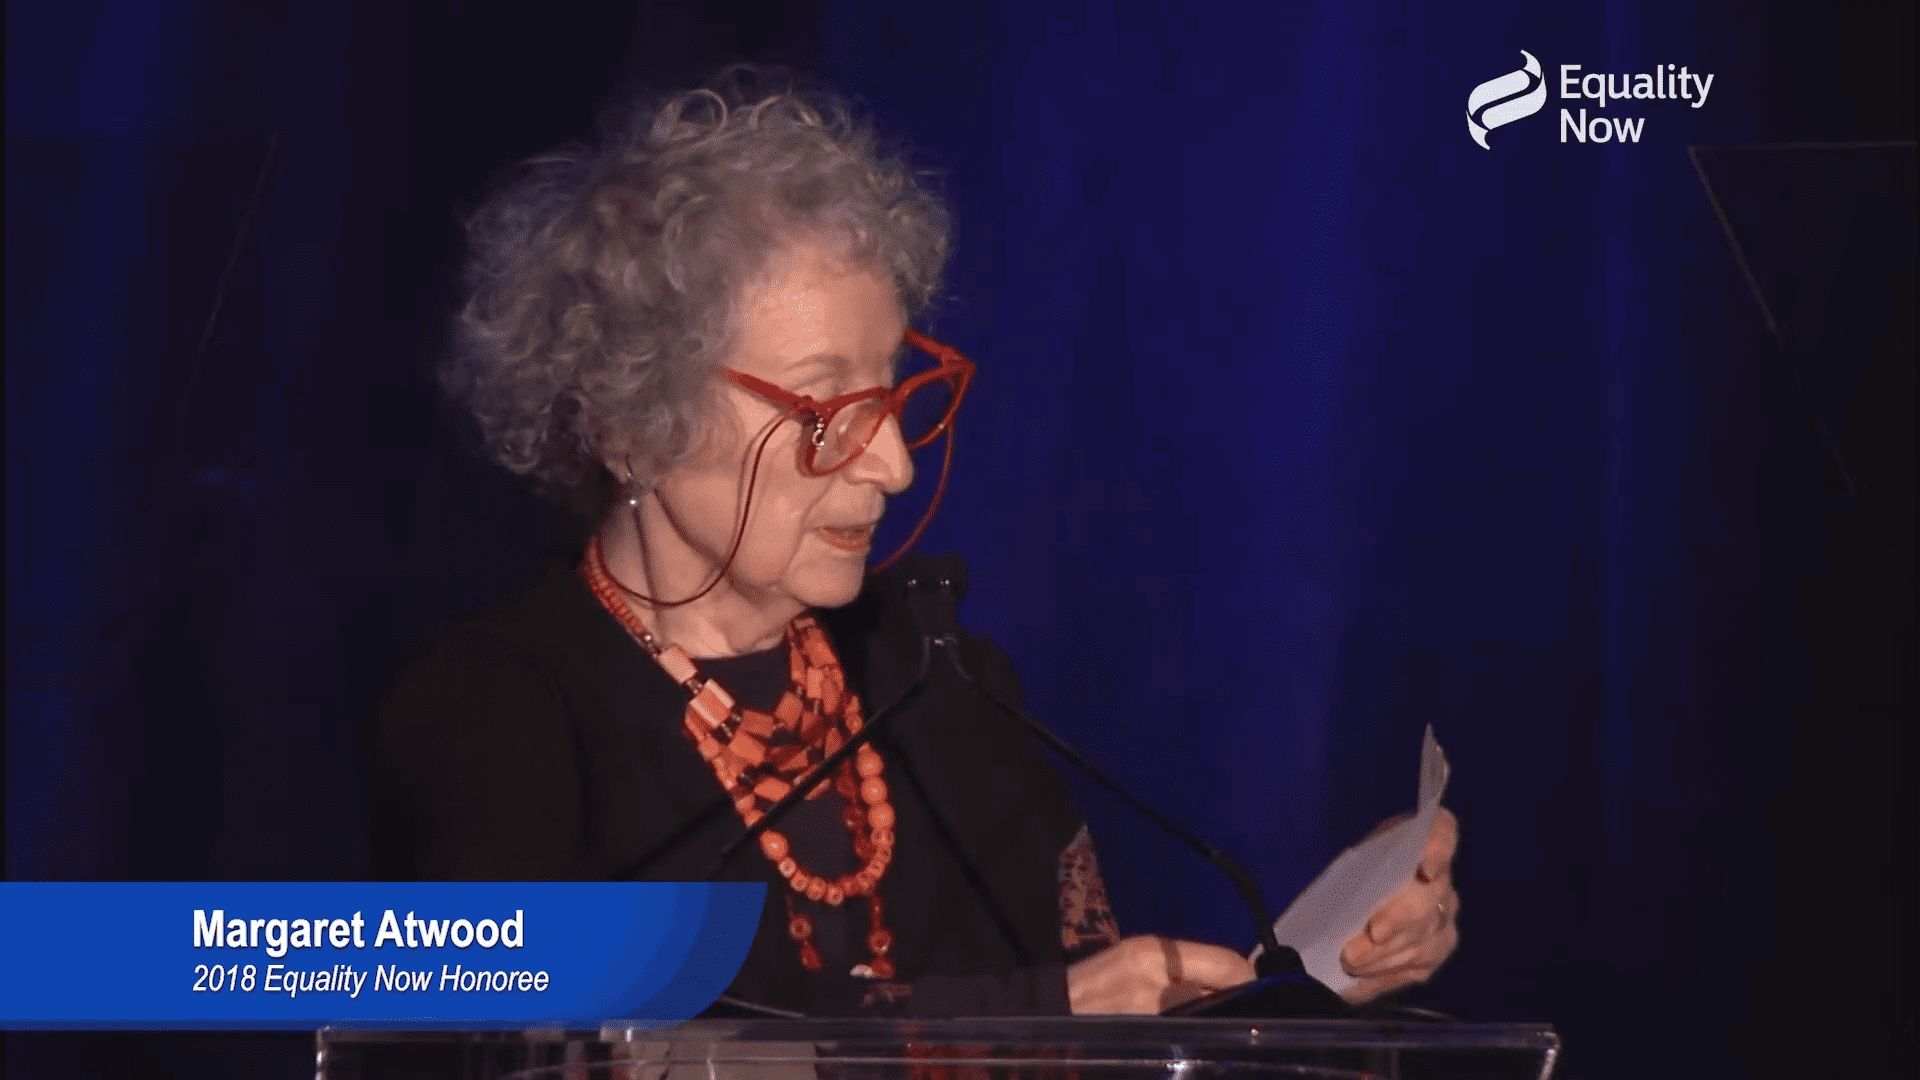 Margaret Atwood, a woman with curly grey hair, at a podium giving a speech